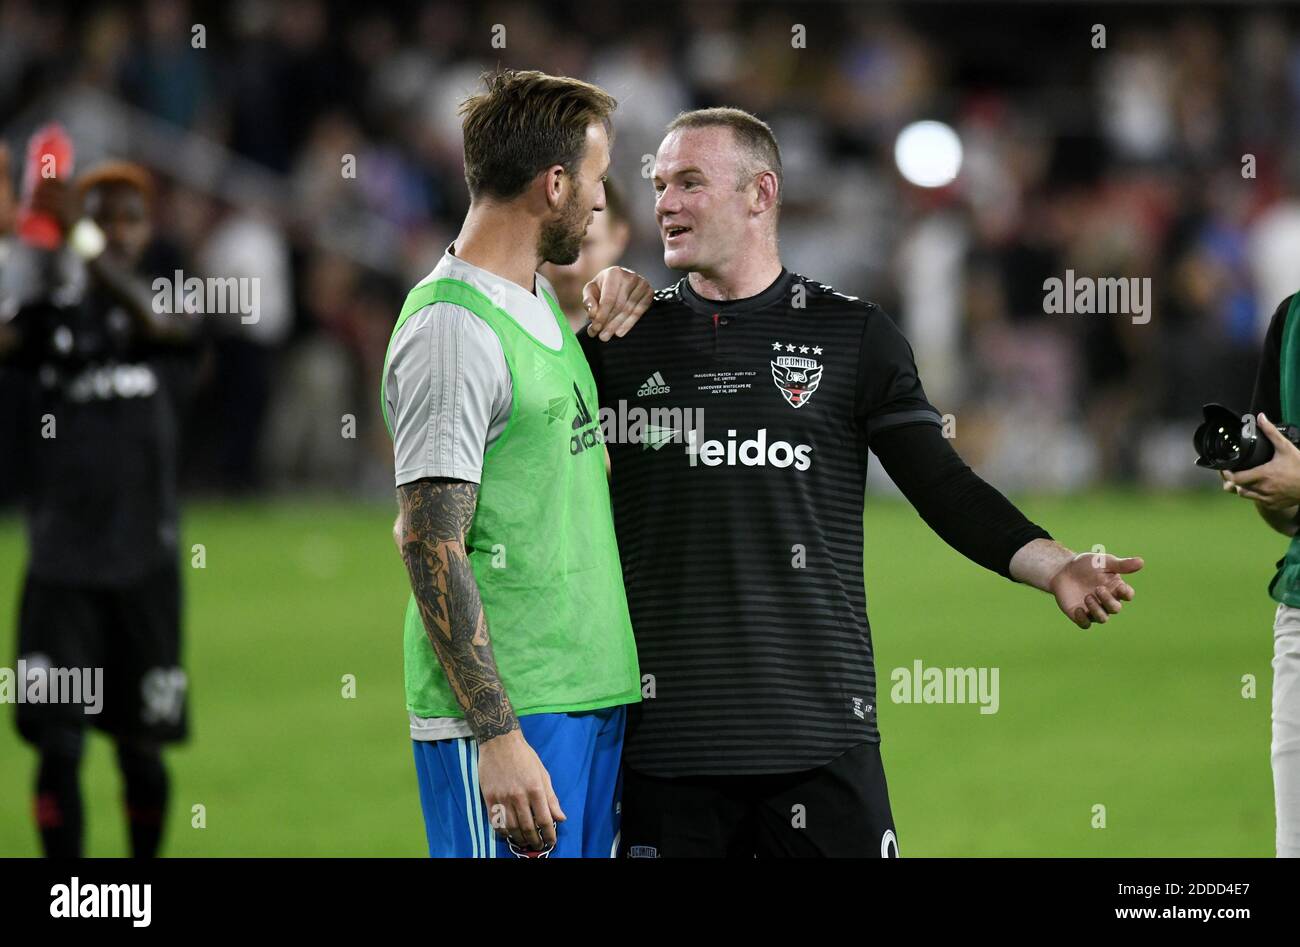 DC United player Wayne Rooney celebrates with teamates after the Major League Soccer match between D.C. United and Vancouver Whitecaps FC at the Audi Field Stadium on July 14, 2018 in Washington D.C.Photo by Olivier Douliery/ Abaca Press Stock Photo